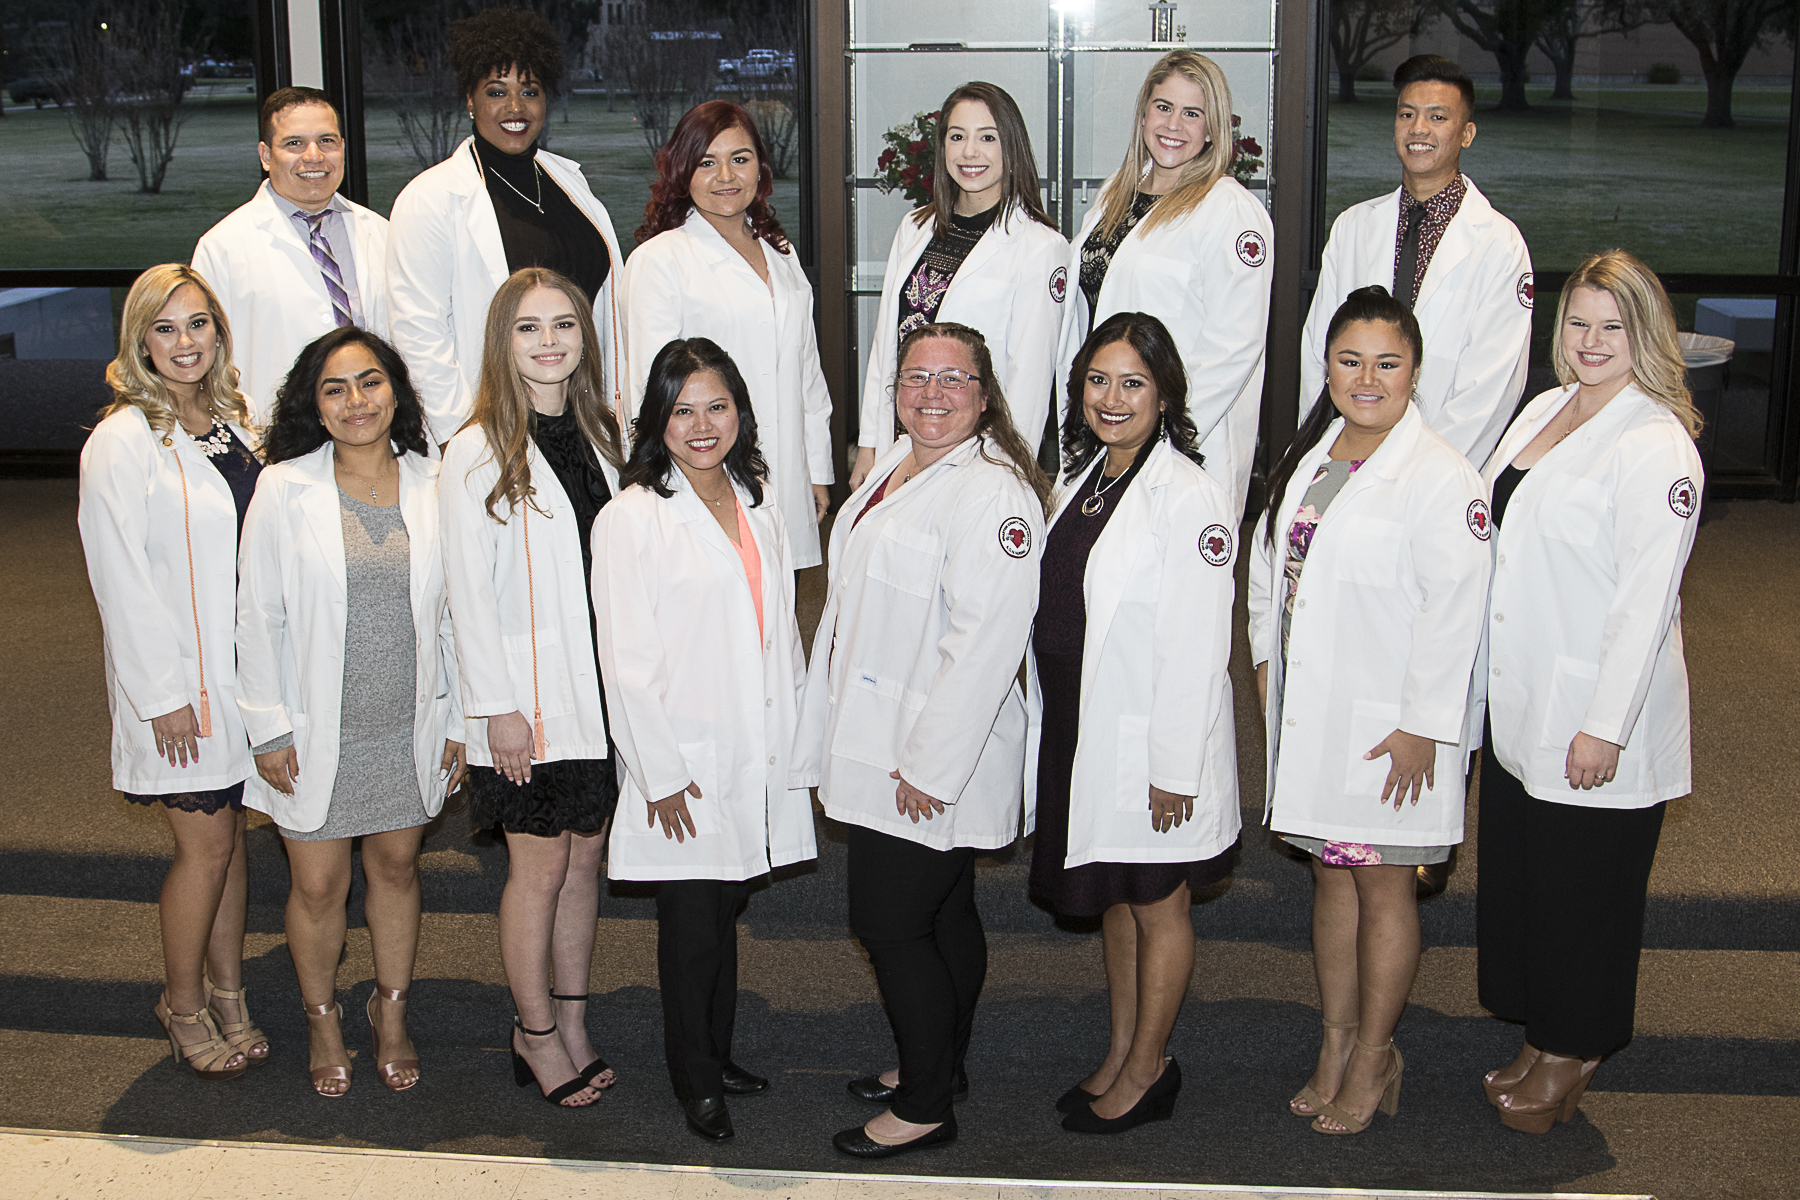 Fifteen students earned their Associate of Applied Science Degree in Nursing from Wharton County Junior College.